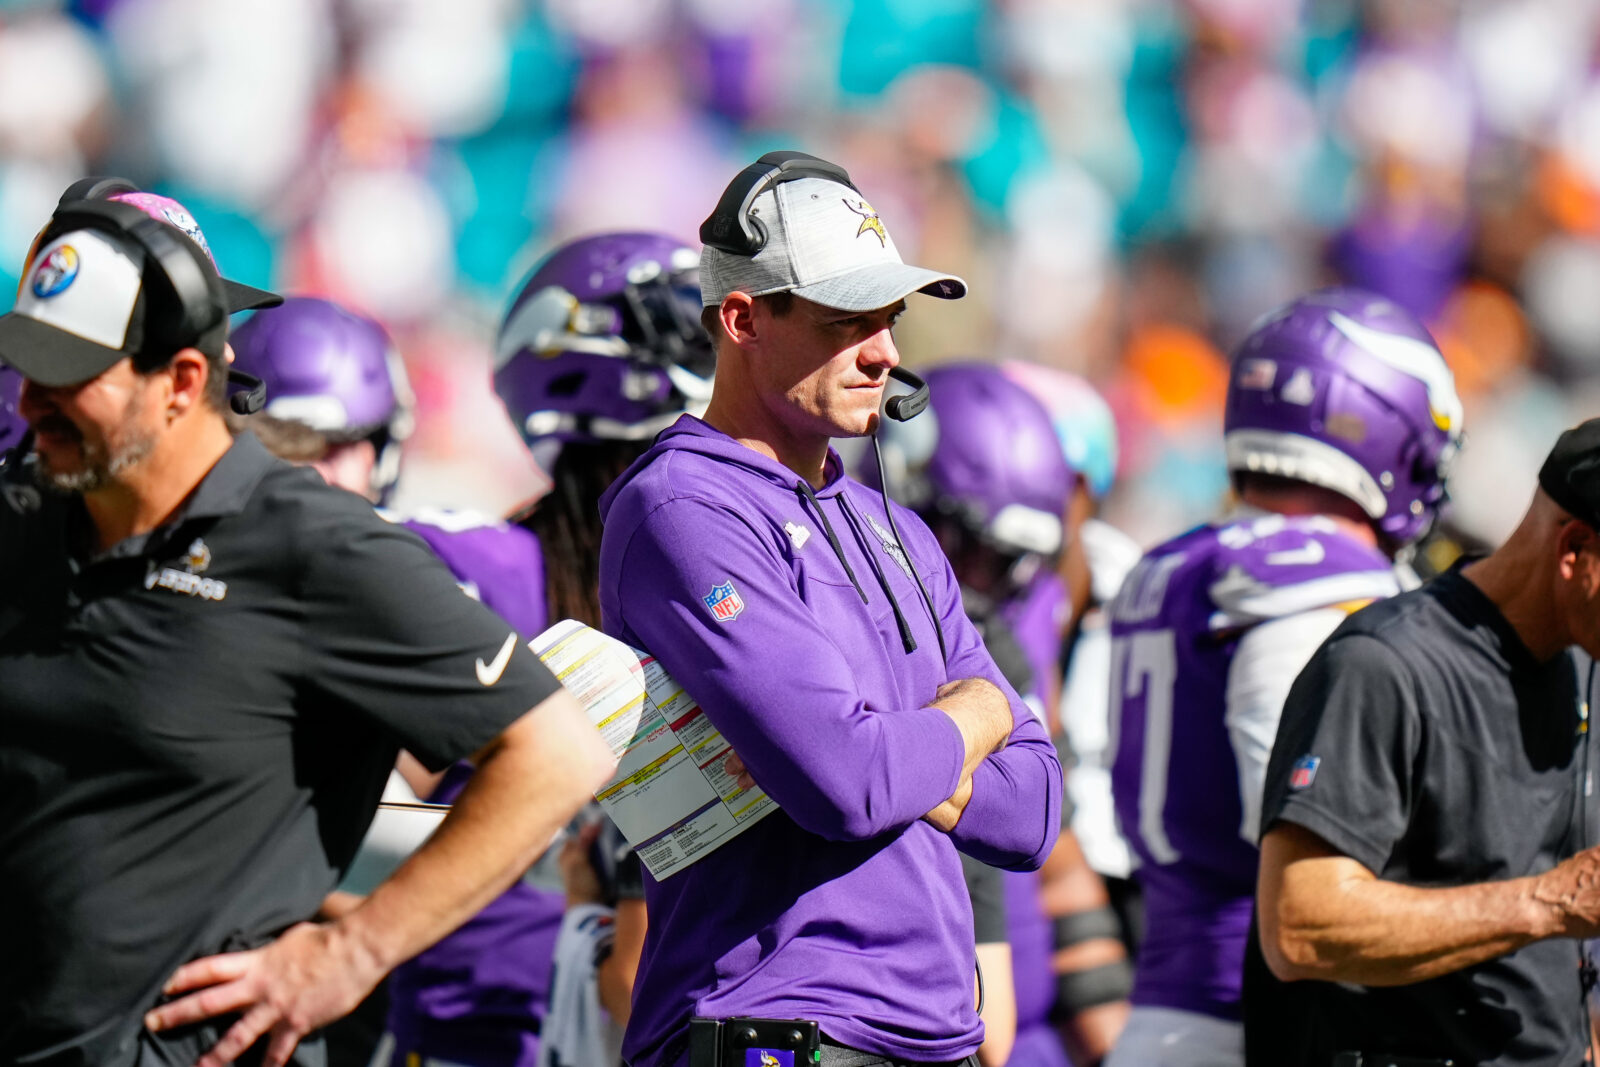 Explained: 8 Strengths of the 2022 Vikings thru 6 Games